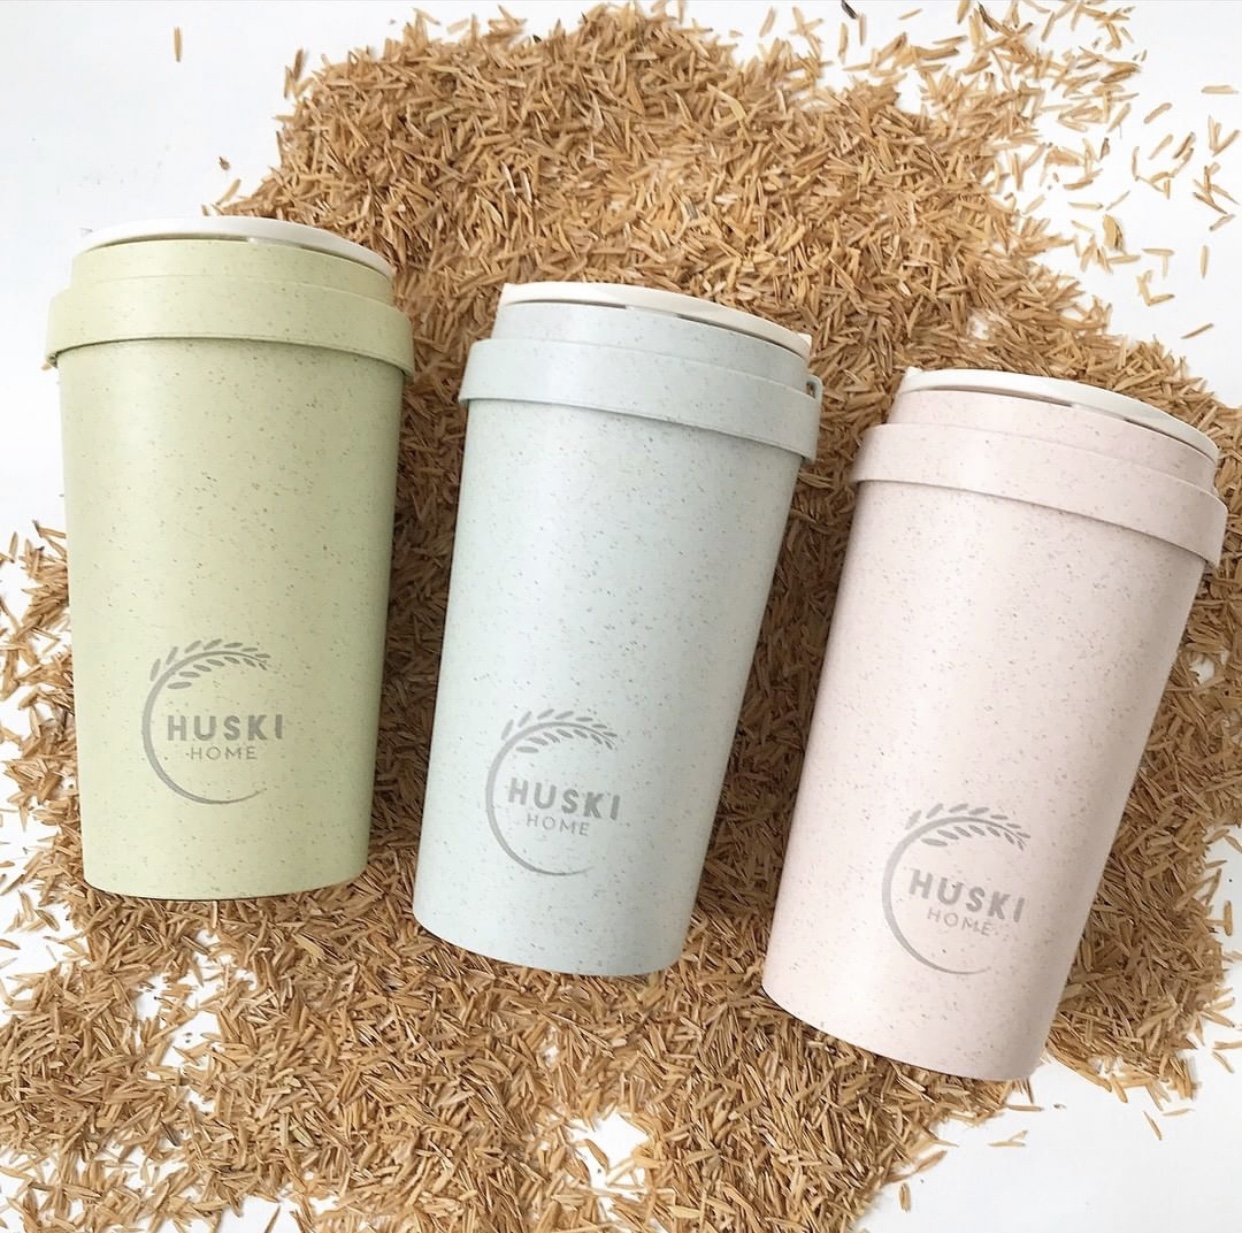 Biodegradable Eco friendly travel cup